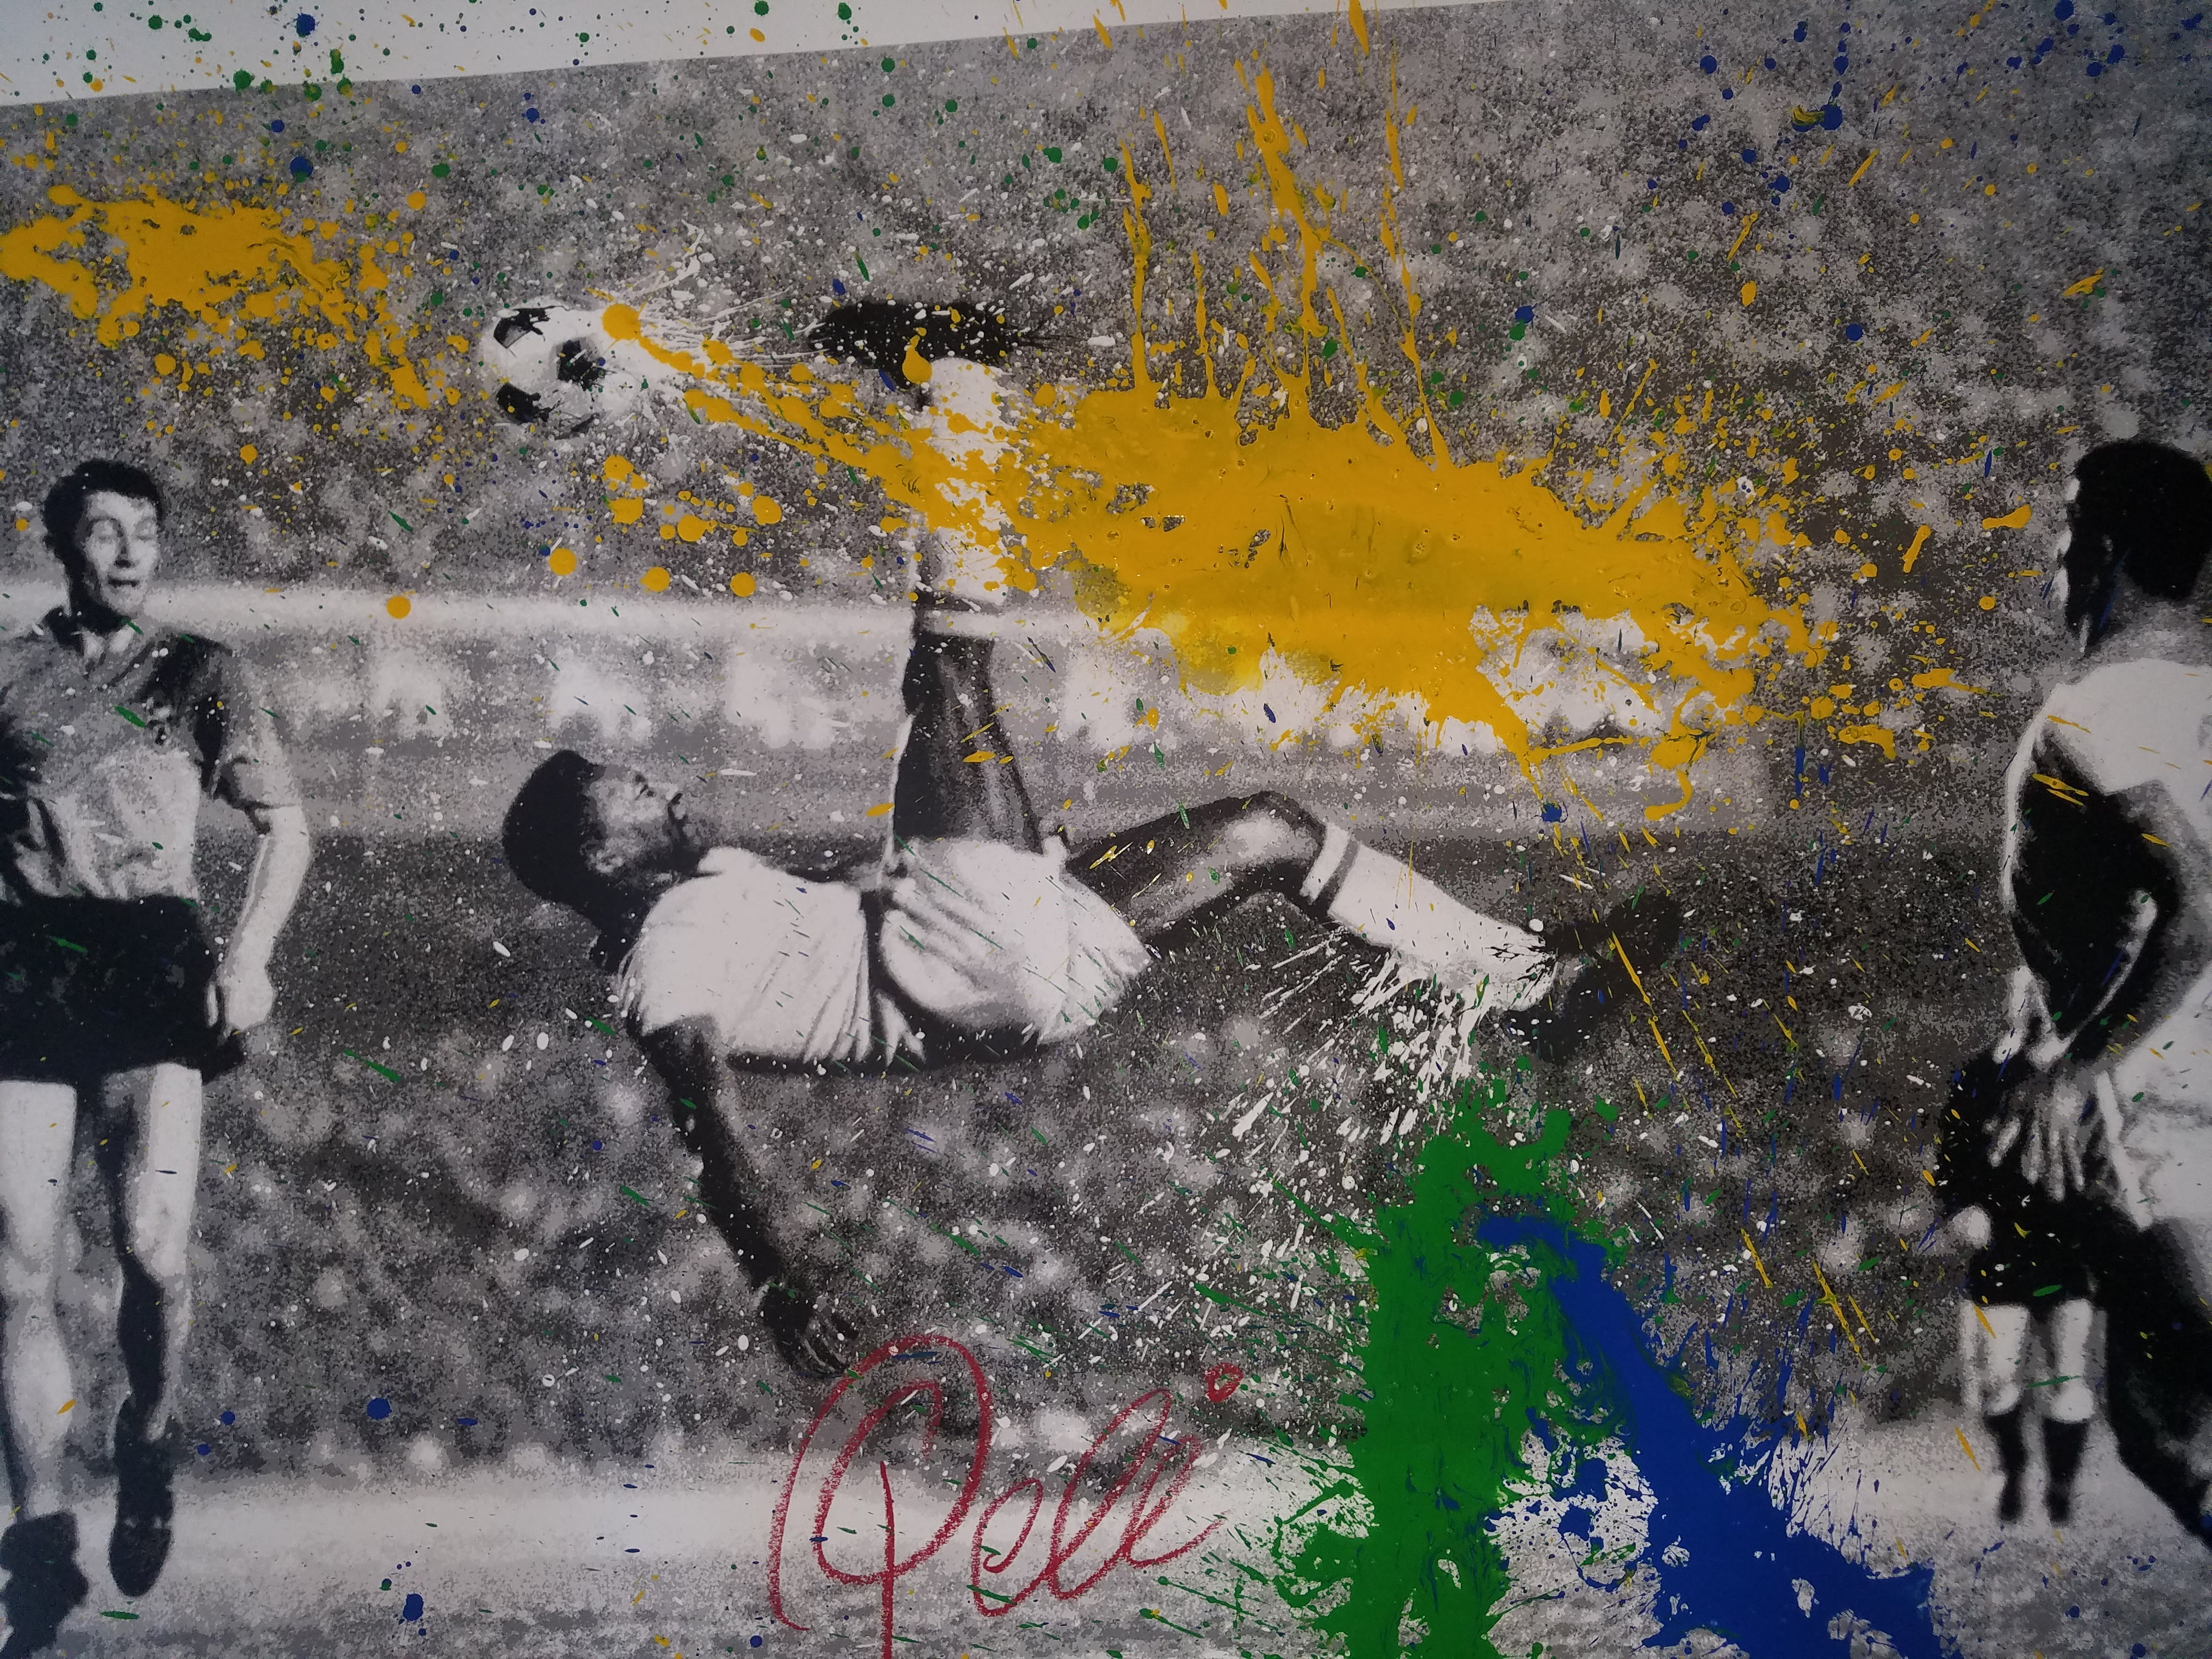 Title: The King Pele  Artist:  Mr. Brainwash  Edition: Edition of 75, hand finished by the artist. Print is also signed by Pele and the artist, numbered with thumb prints on the back  Type: Five color screen print on hand torn archival art paper.  Size: 48" x 36"  Notes: Certificate of authenticity will also be included.  Check out our other listings for more hard-to-find and out-of-print posters.   Ready to ship.